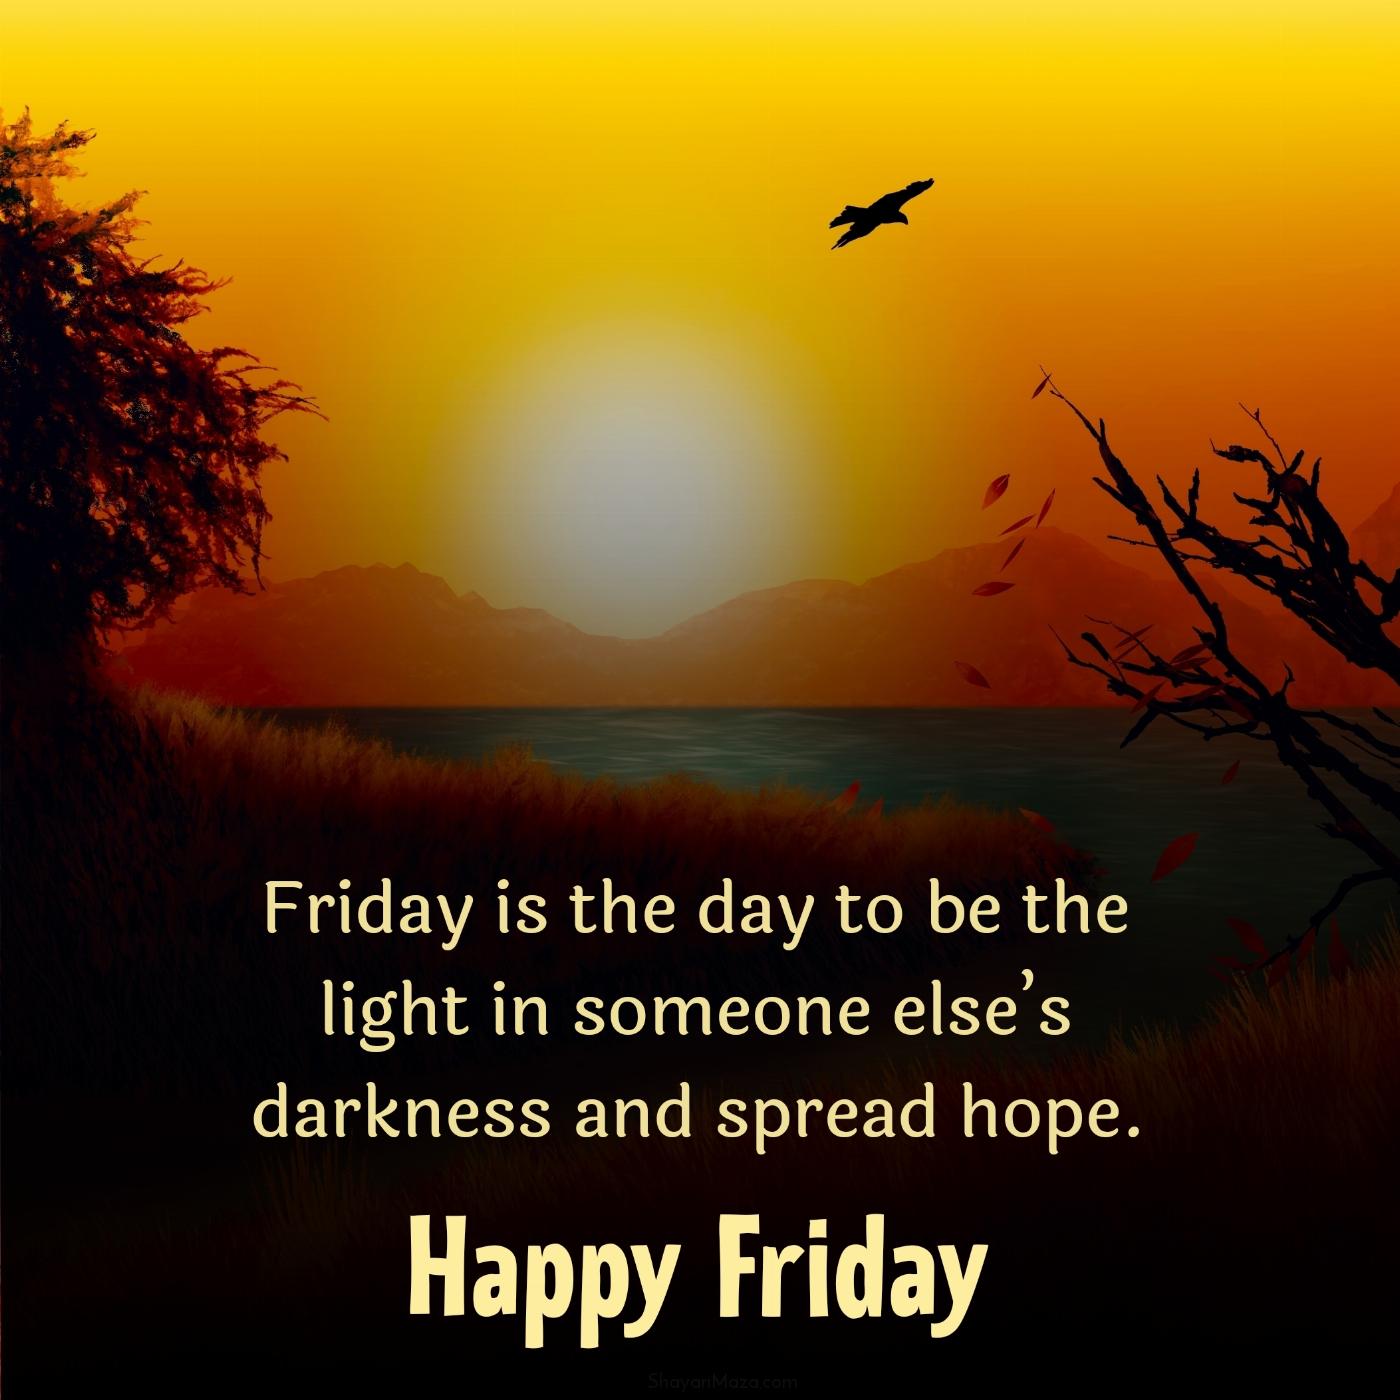 Friday is the day to be the light in someone elses darkness